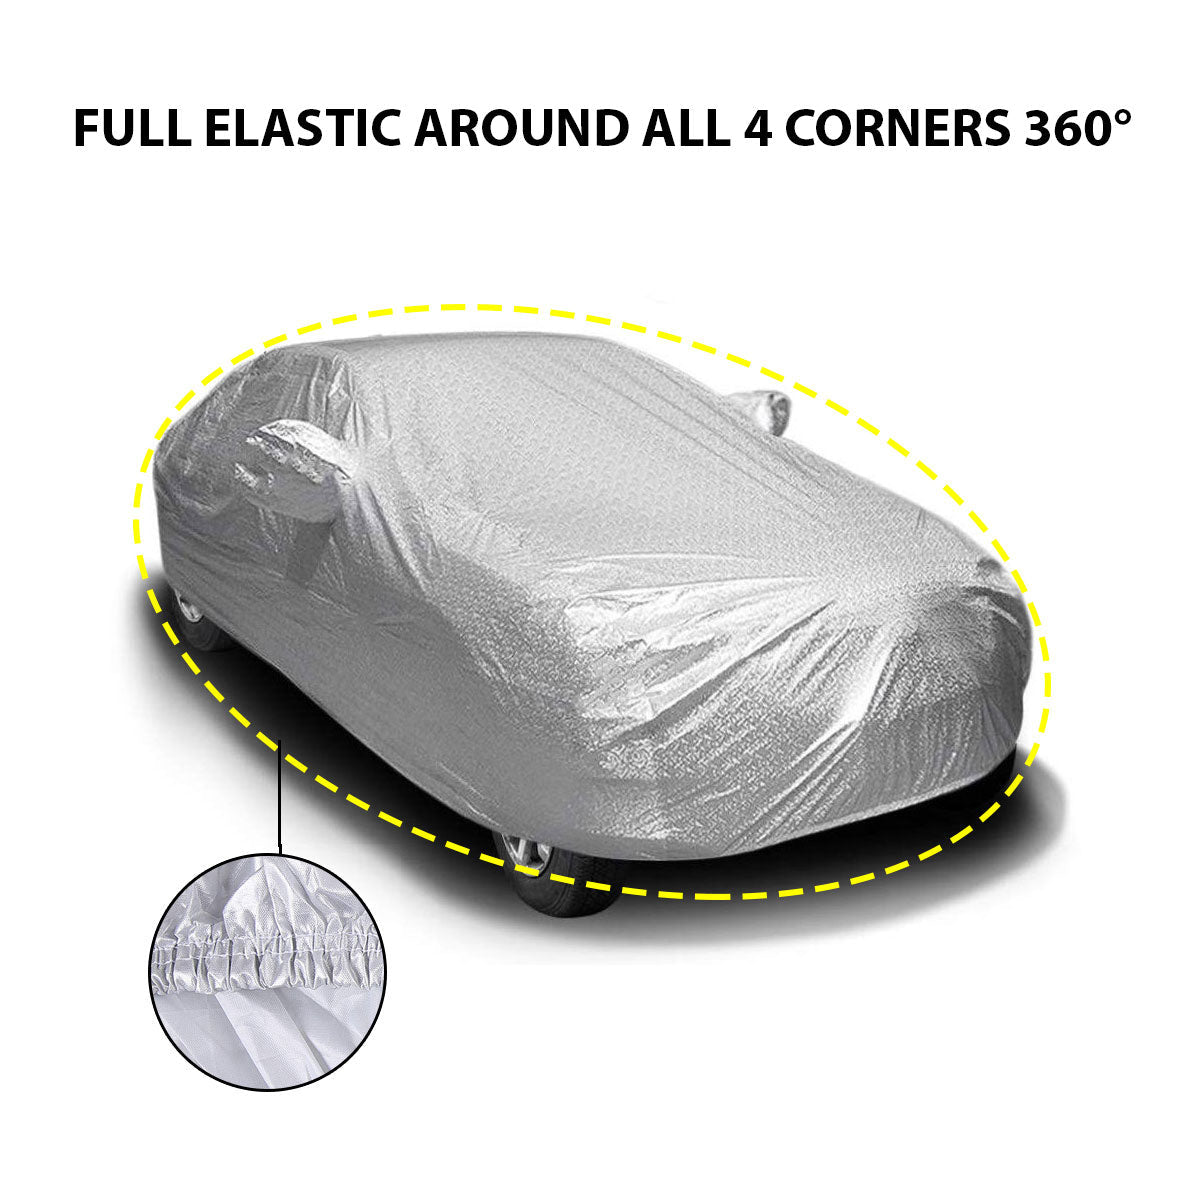 Oshotto Spyro Silver Anti Reflective, dustproof and Water Proof Car Body Cover with Mirror Pockets For Honda Accord